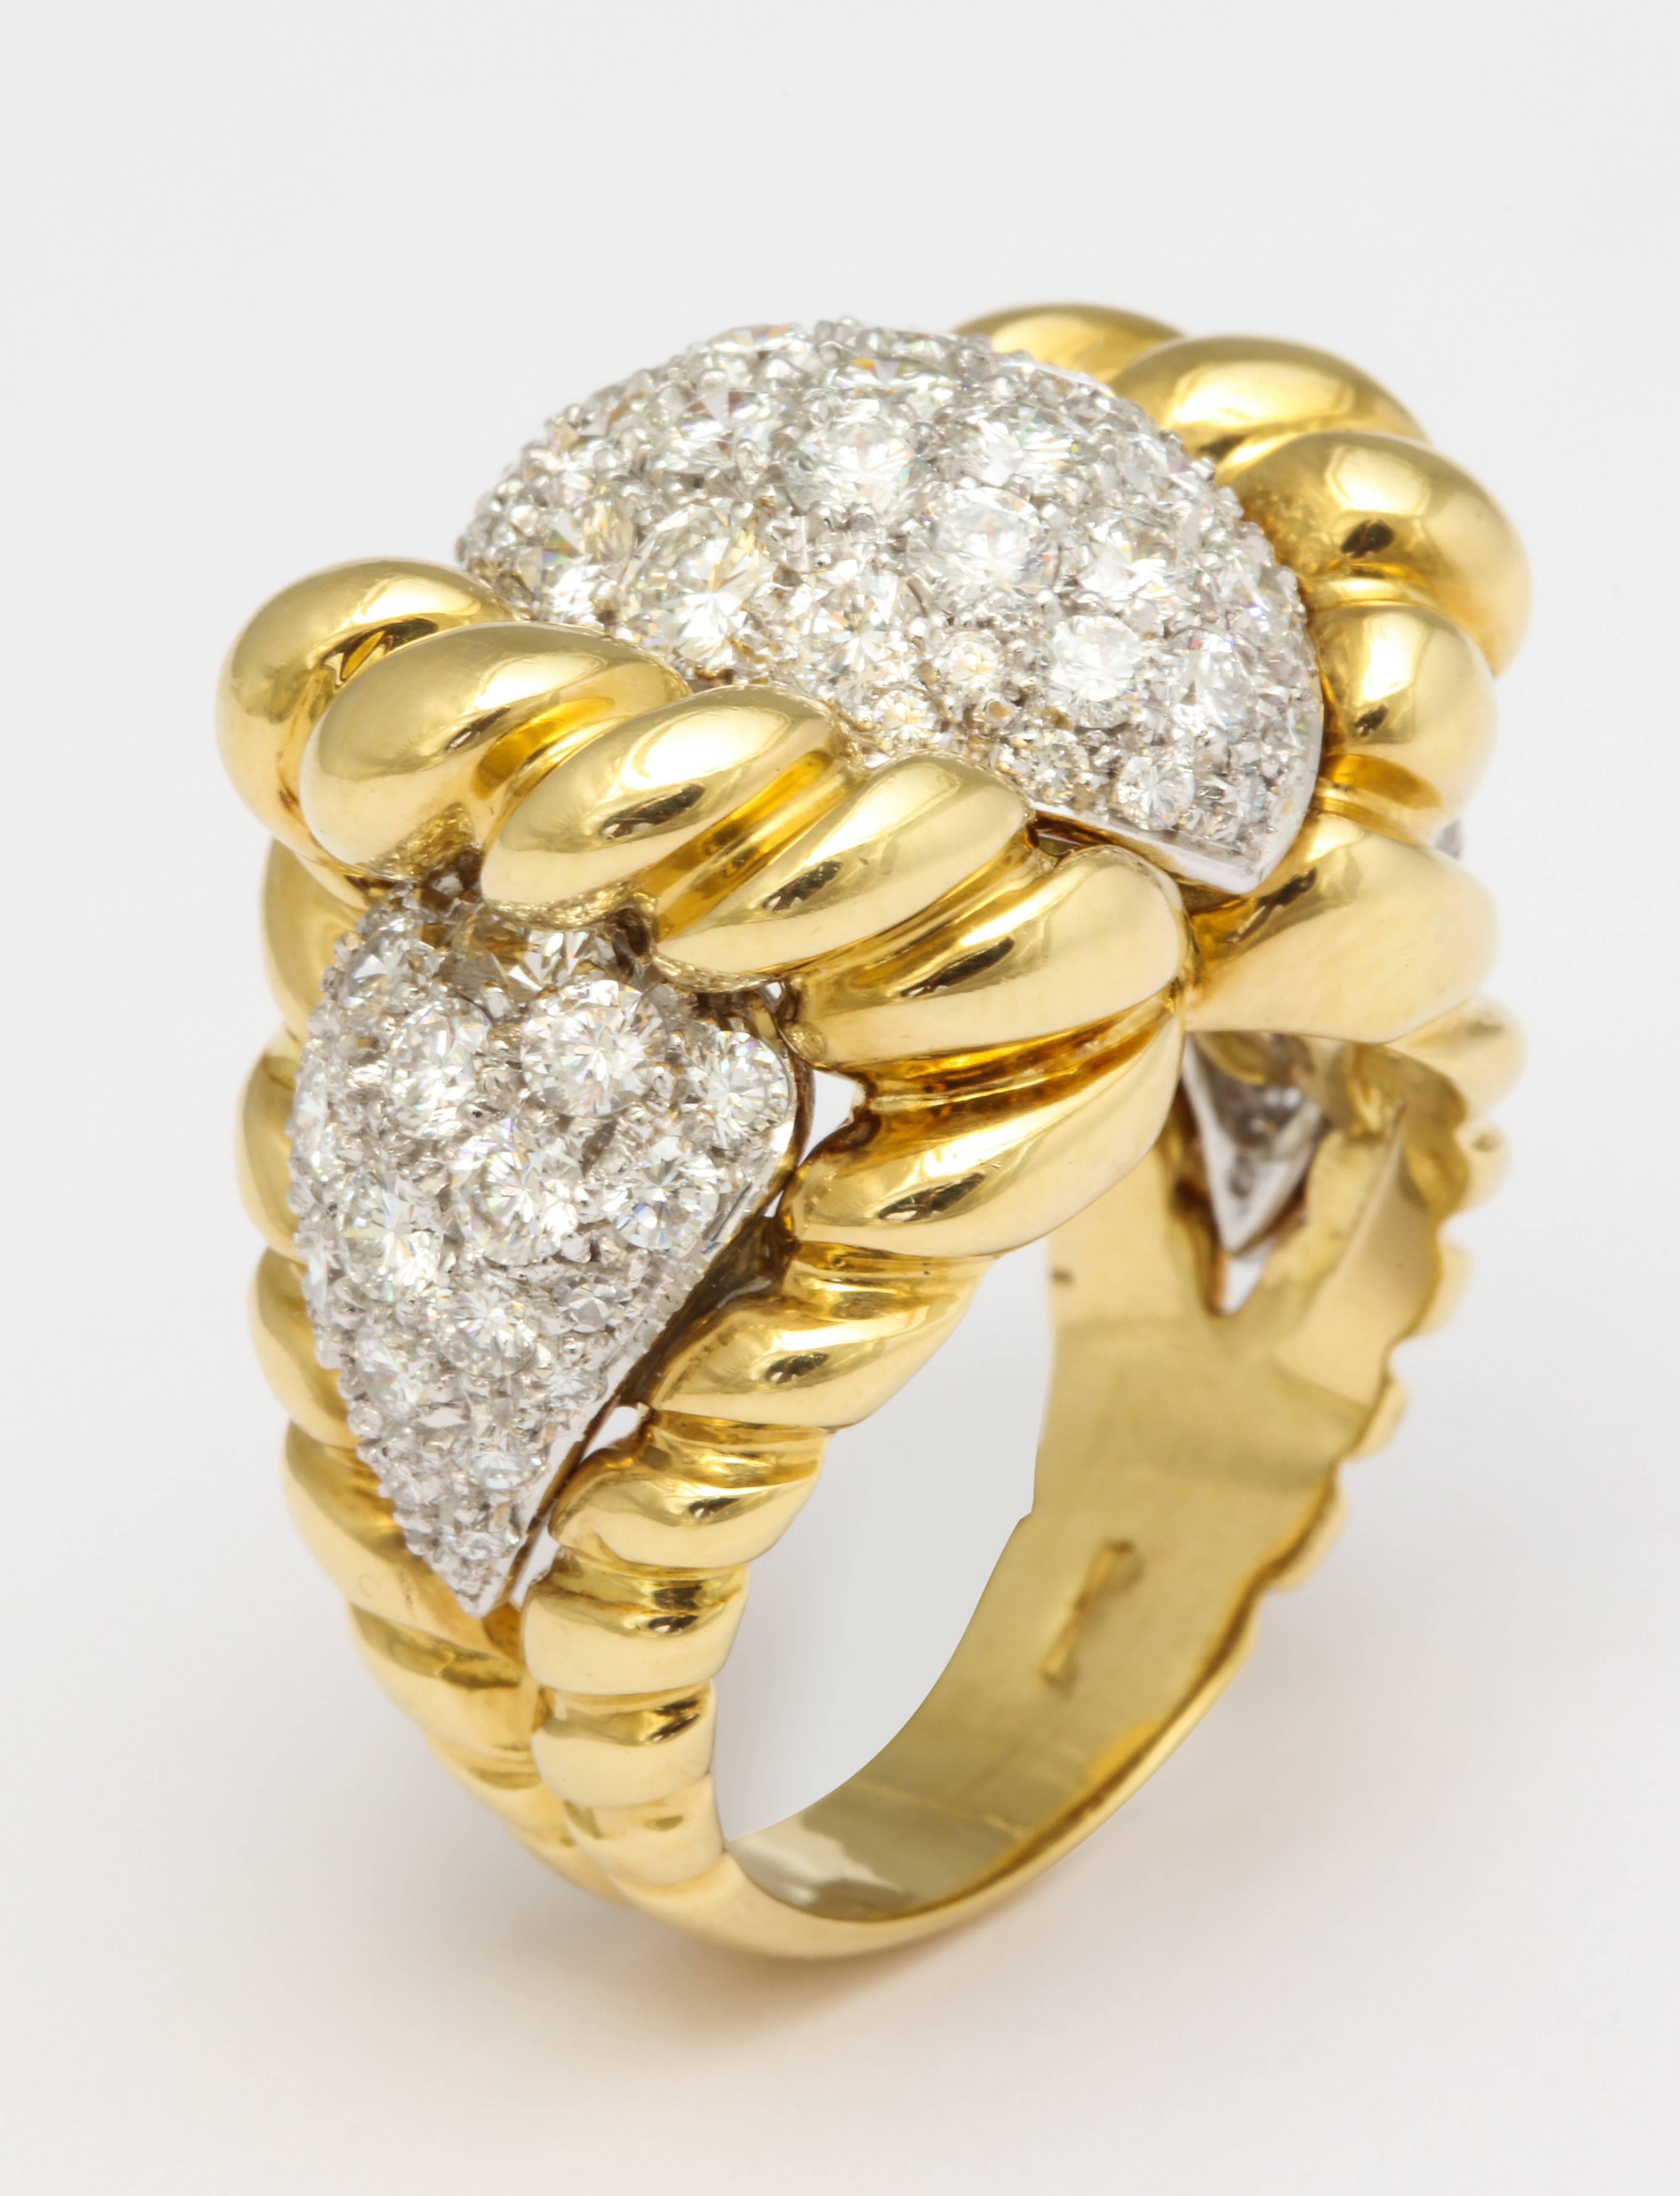 Women's Gold and Diamond Cocktail Ring